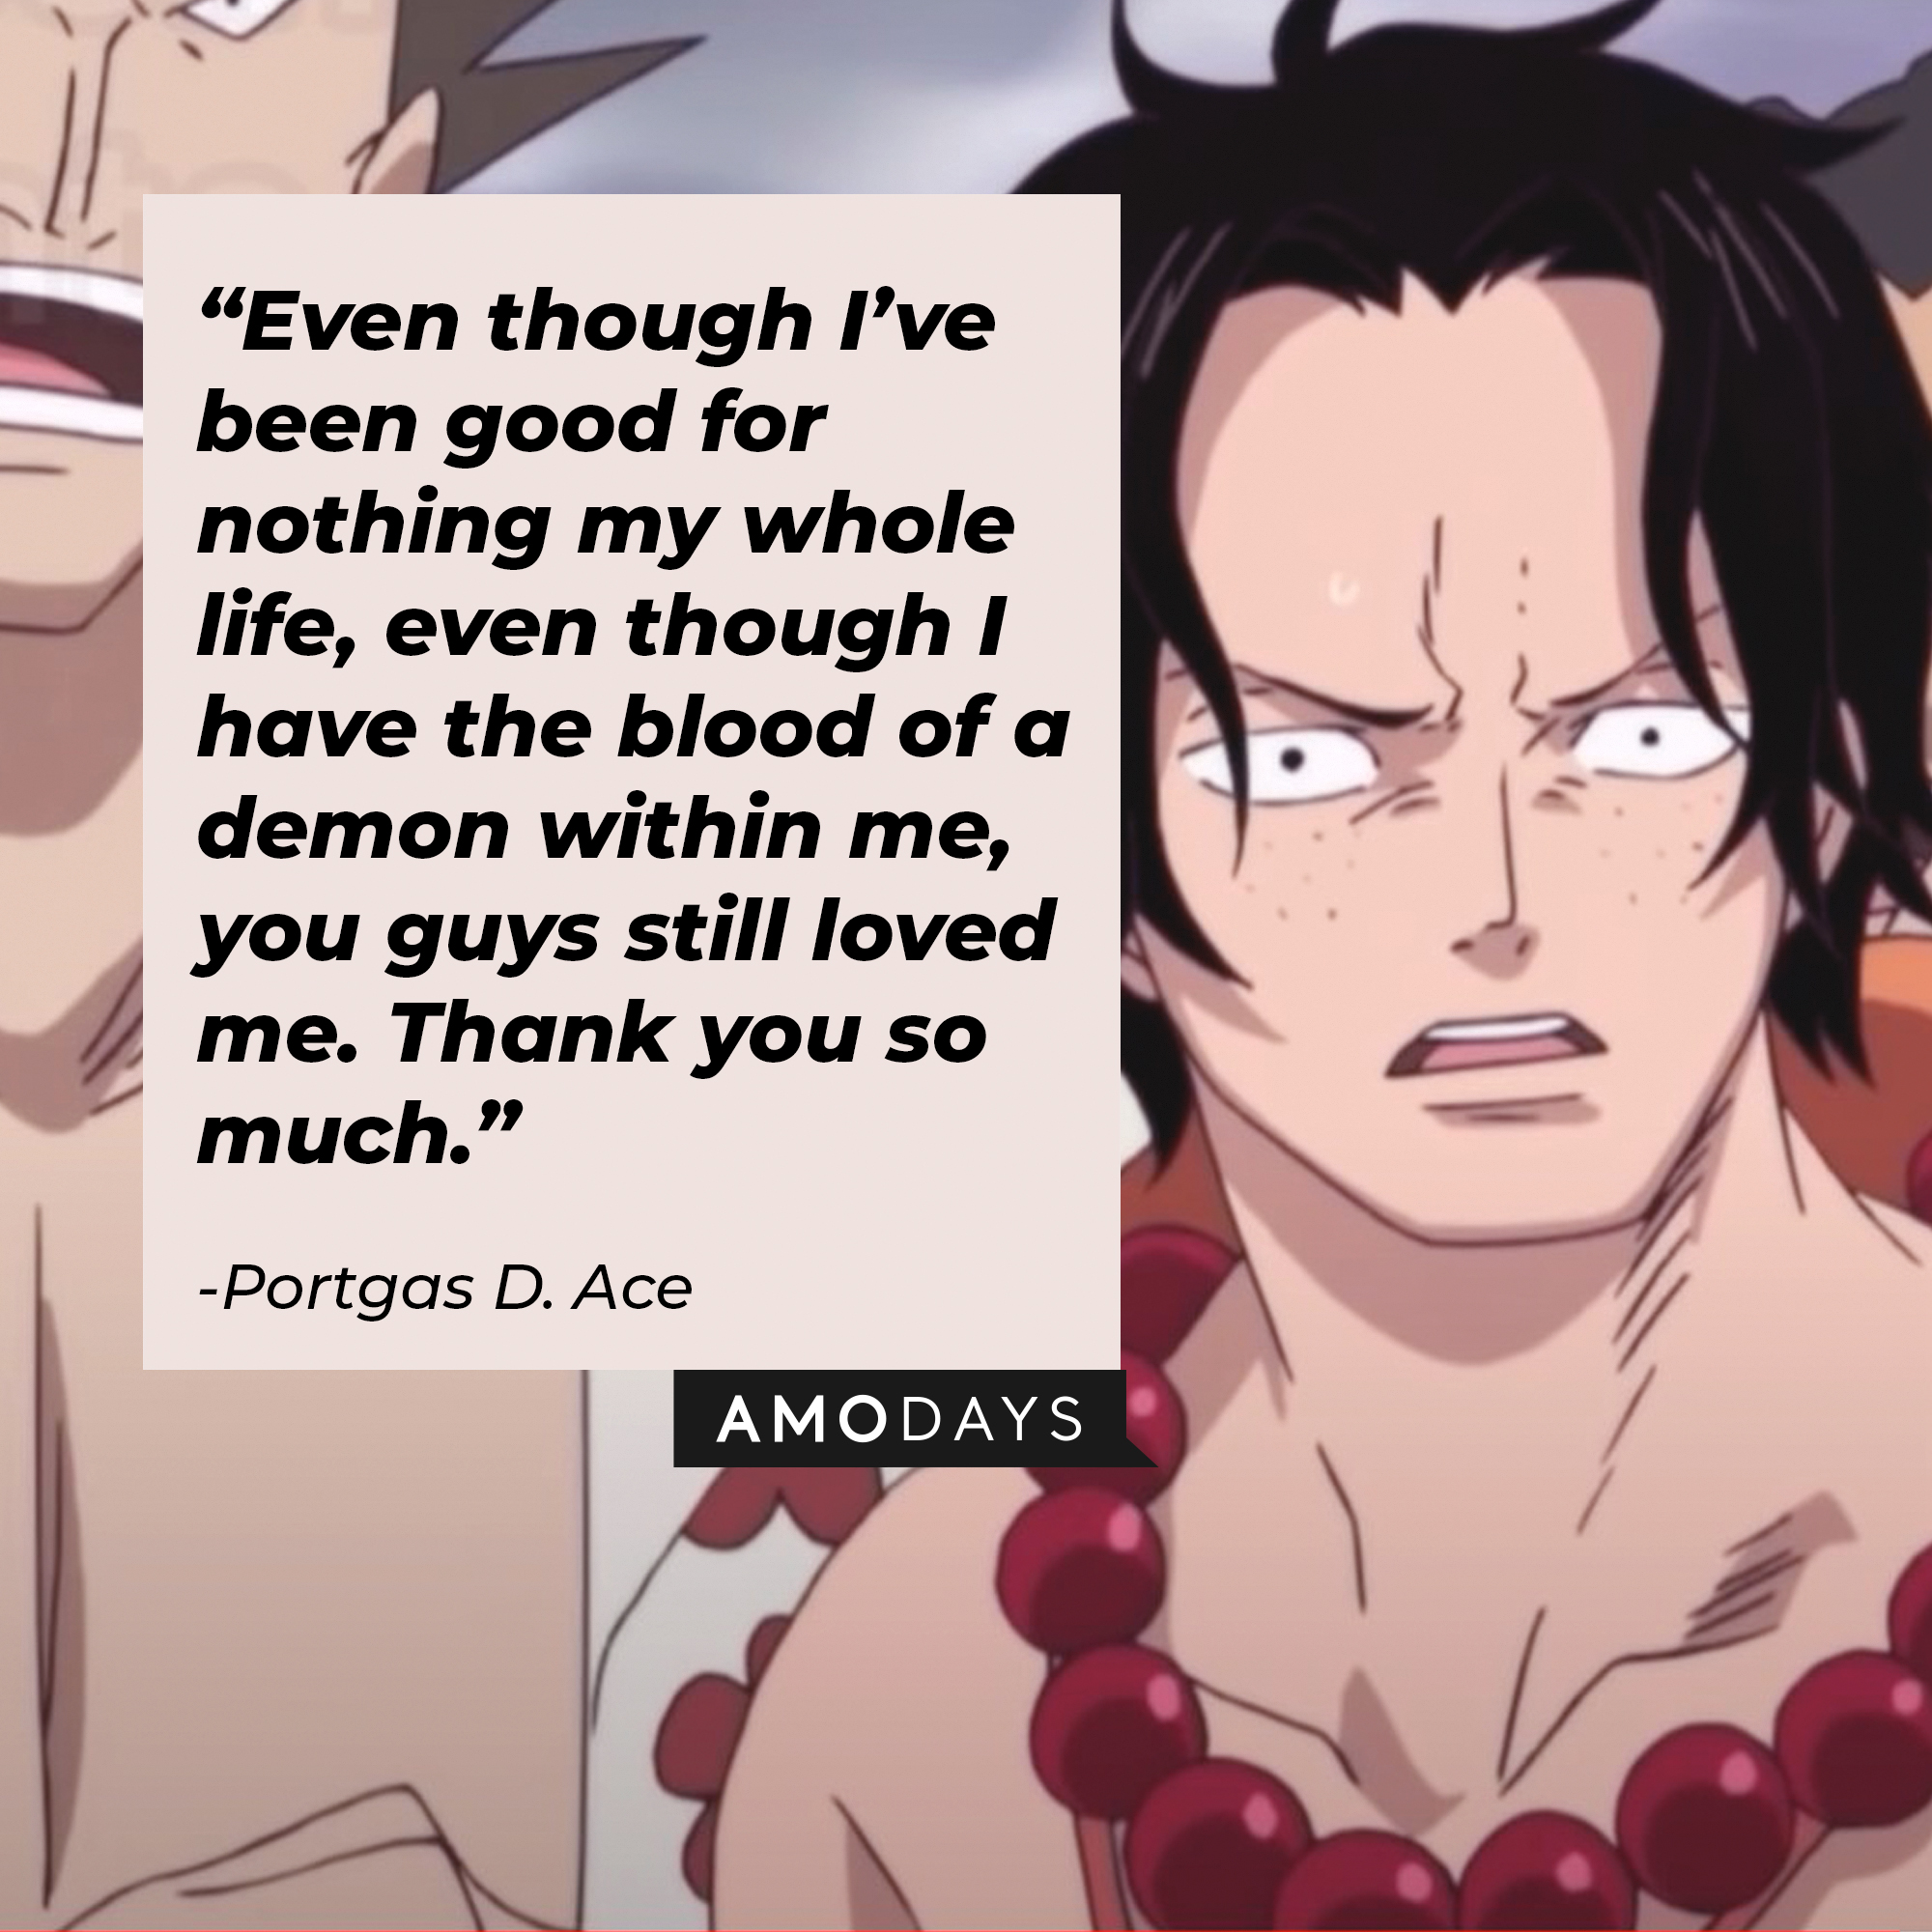 ]A picture of Portgas D. Ace’s with a quote by him: “Even though I’ve been good for nothing my whole life, even though I have the blood of a demon within me, you guys still loved me. Thank you so much.” | Source: facebook.com/onepieceofficial